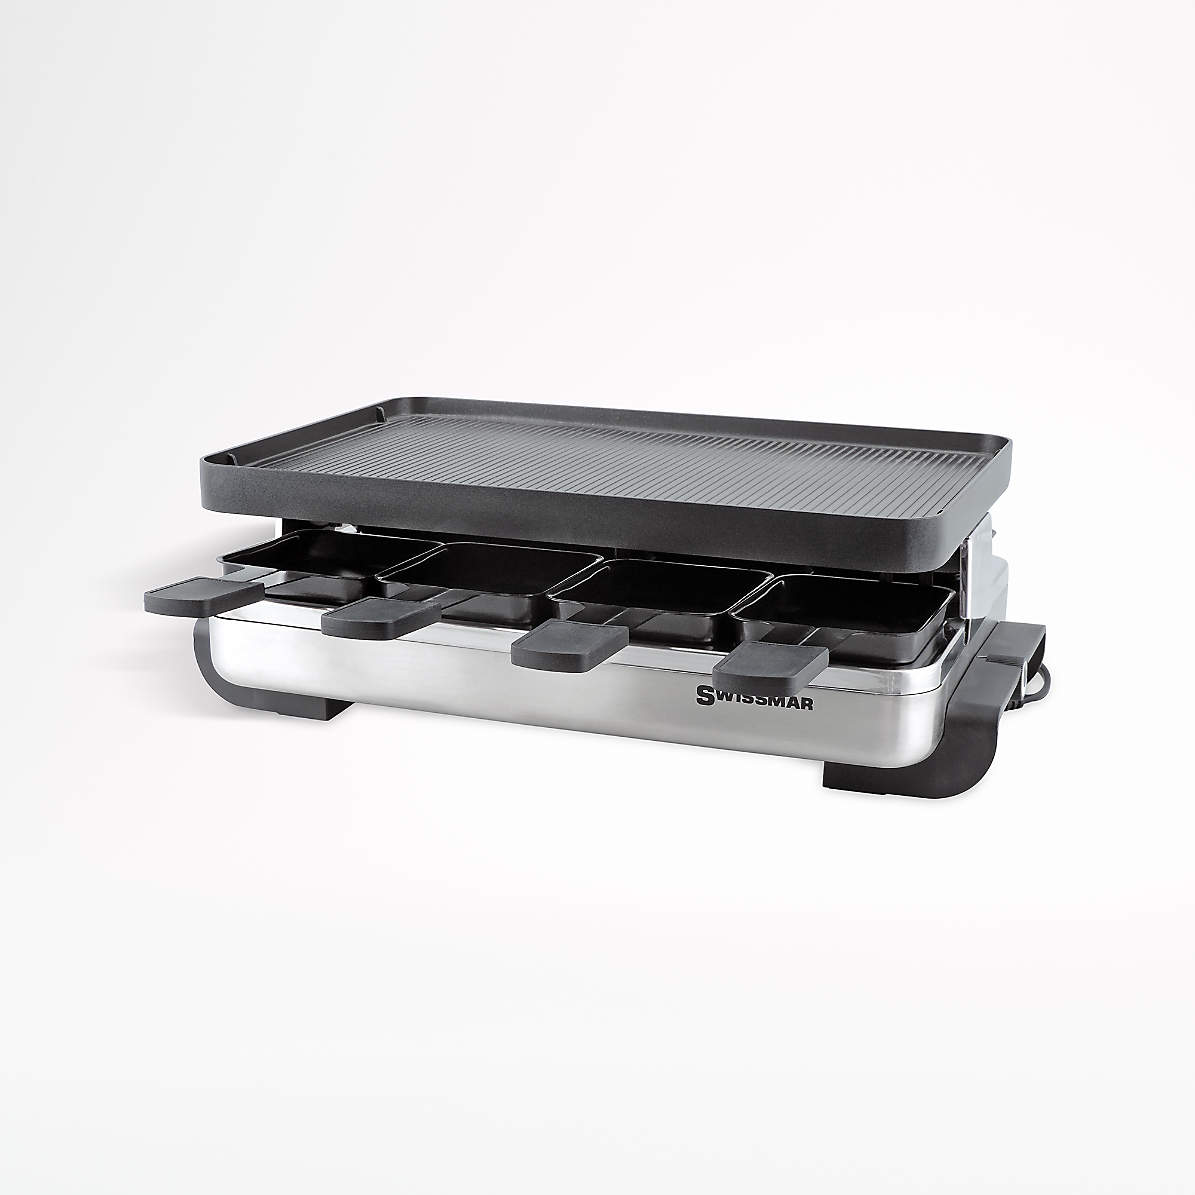 Stelvio 8-Person Stainless Steel Raclette with Cast Aluminum Grill Plate | Crate & Barrel